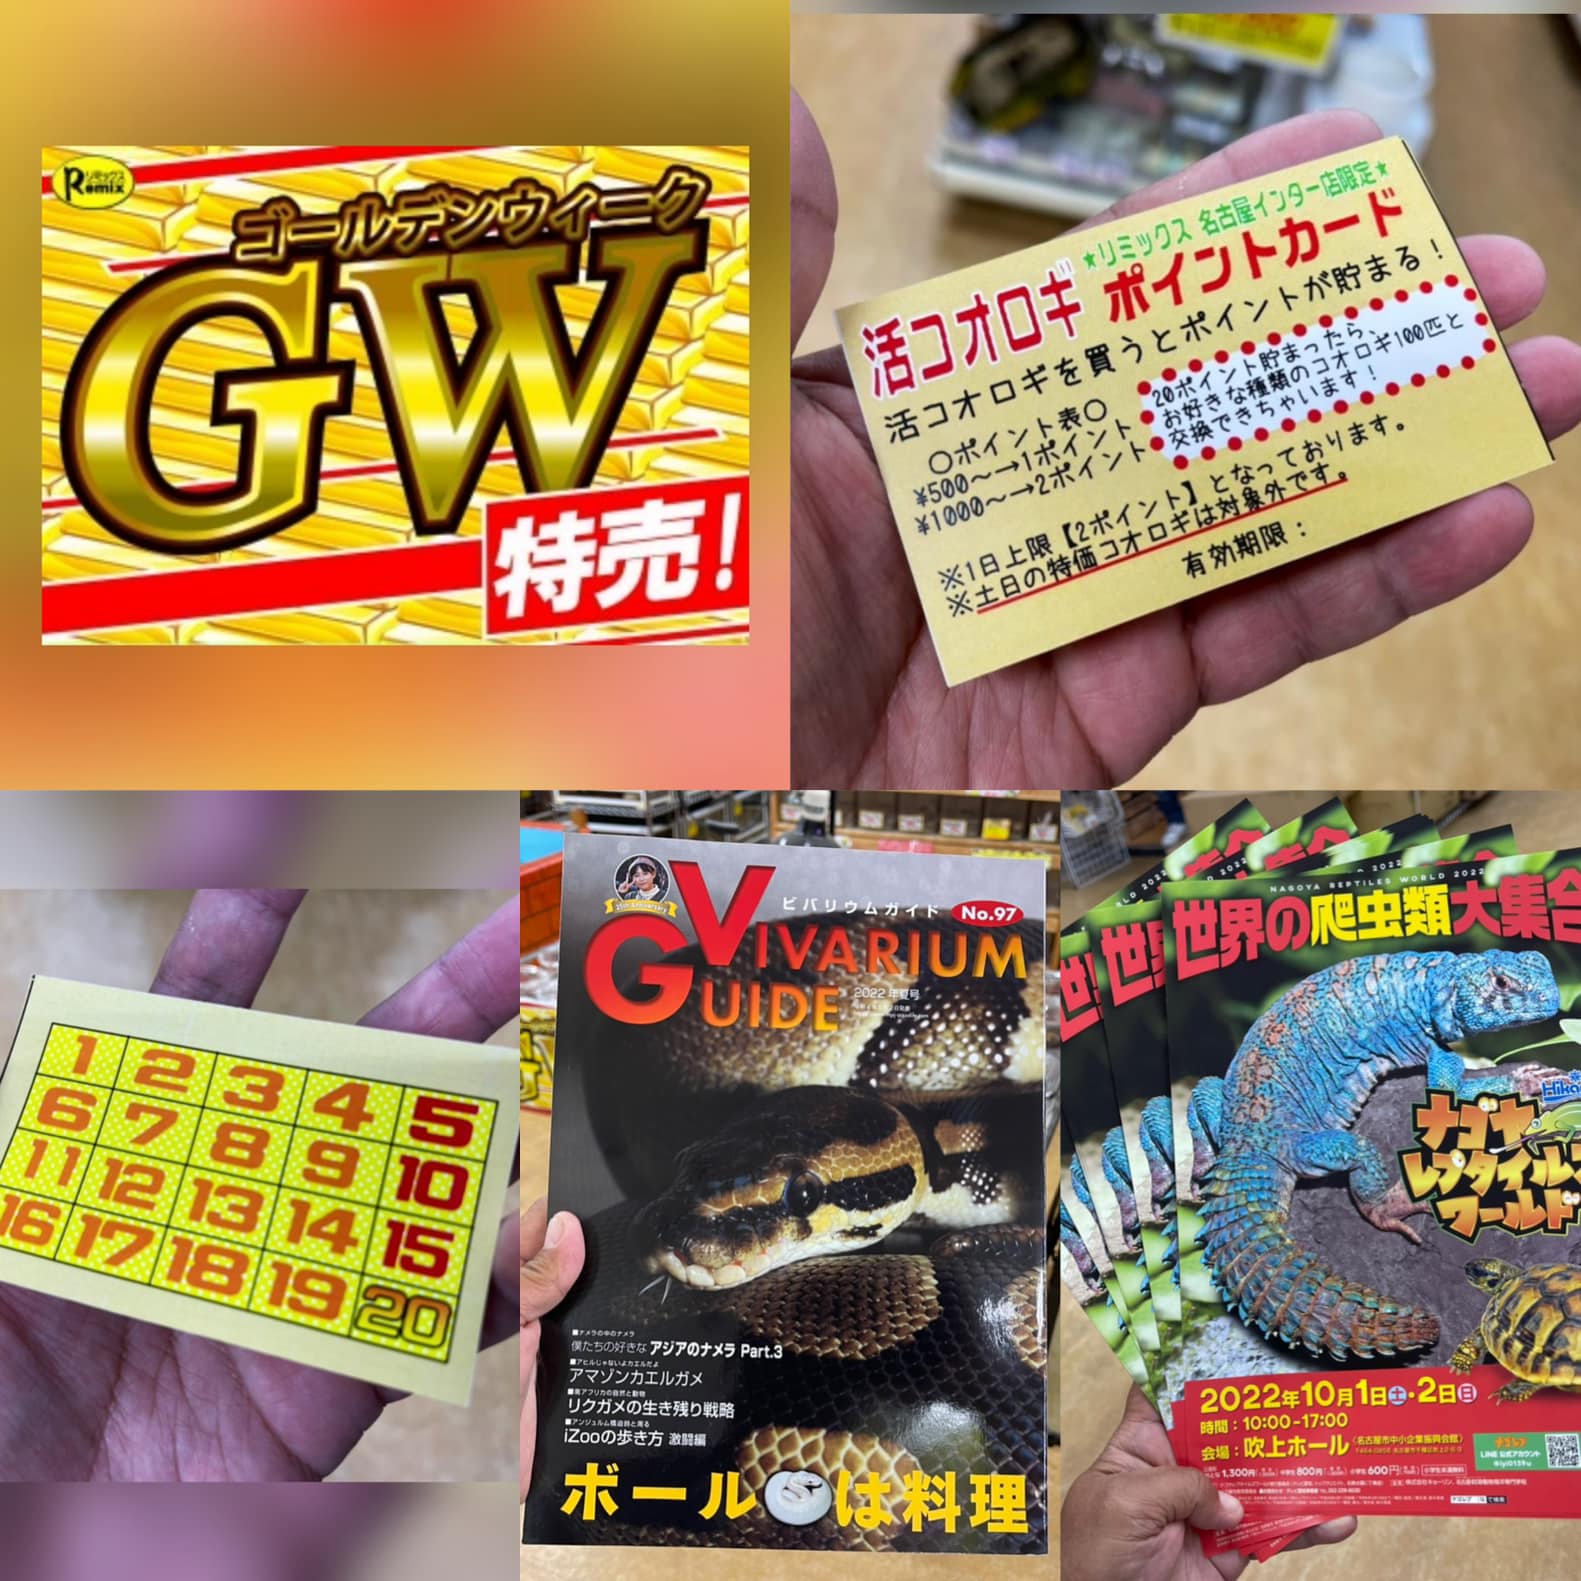 ＧＷ特売開催中です！！